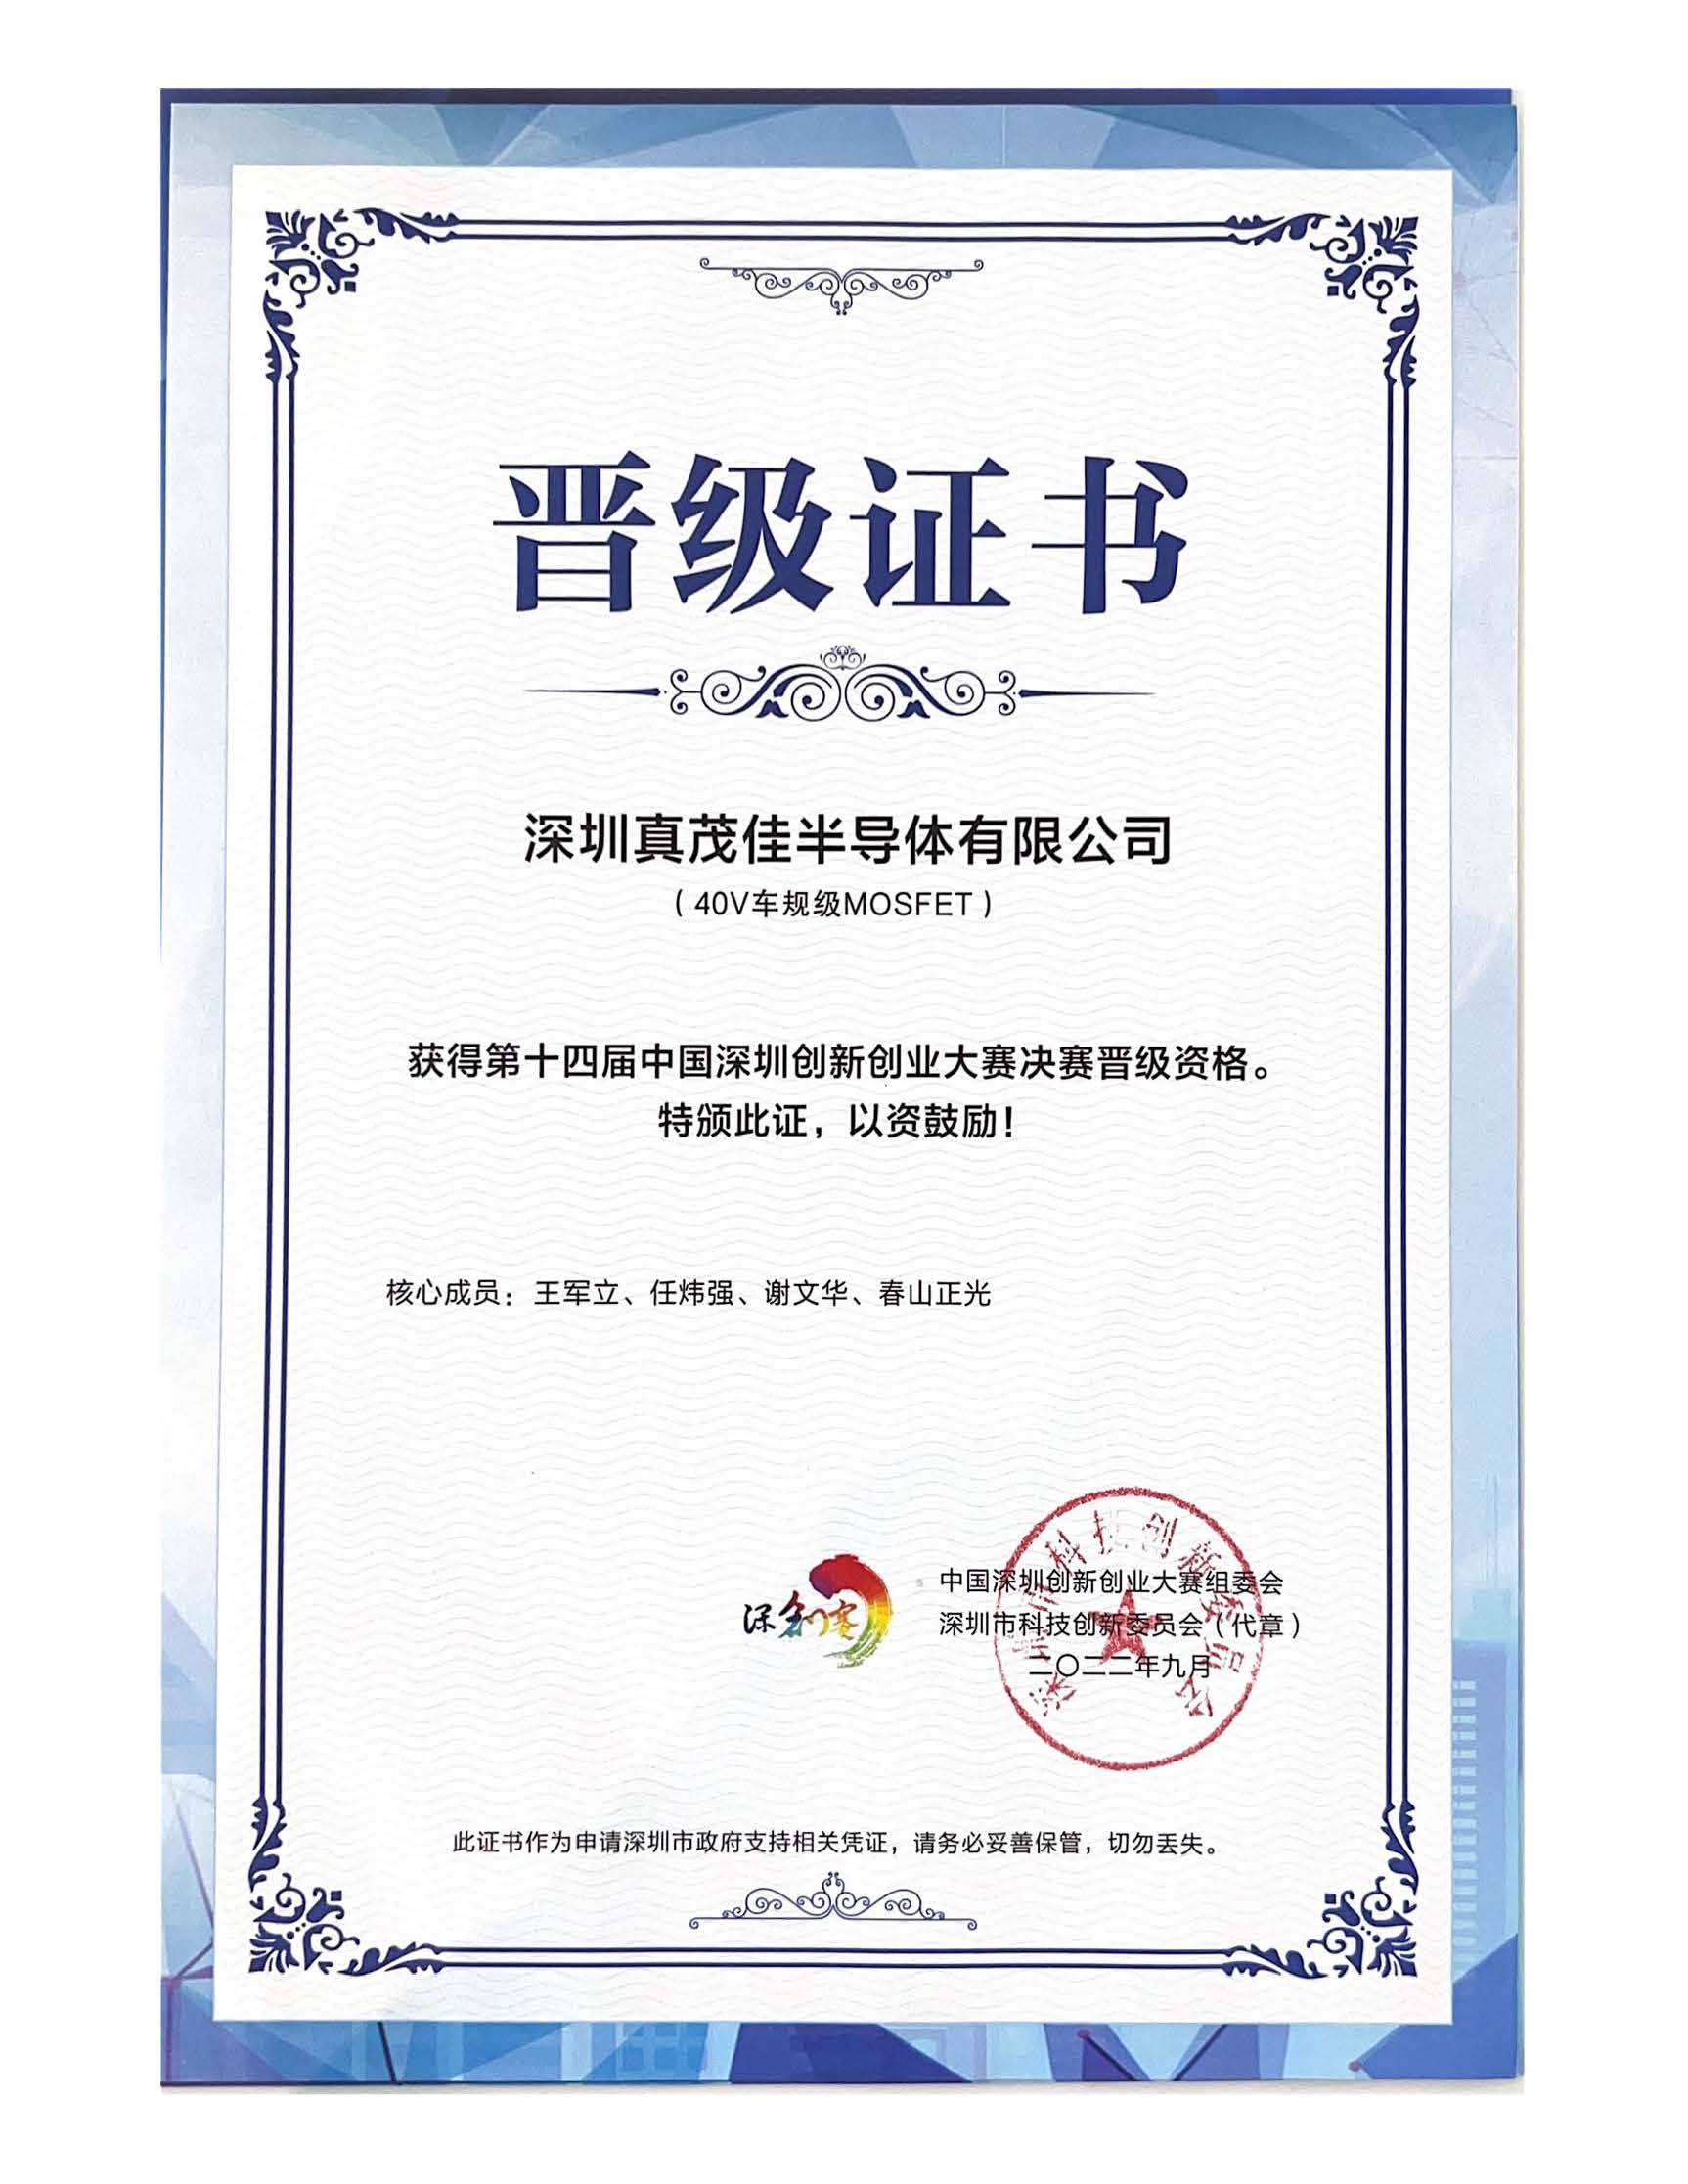 The 14th China Innovation and Entrepreneurship Competition